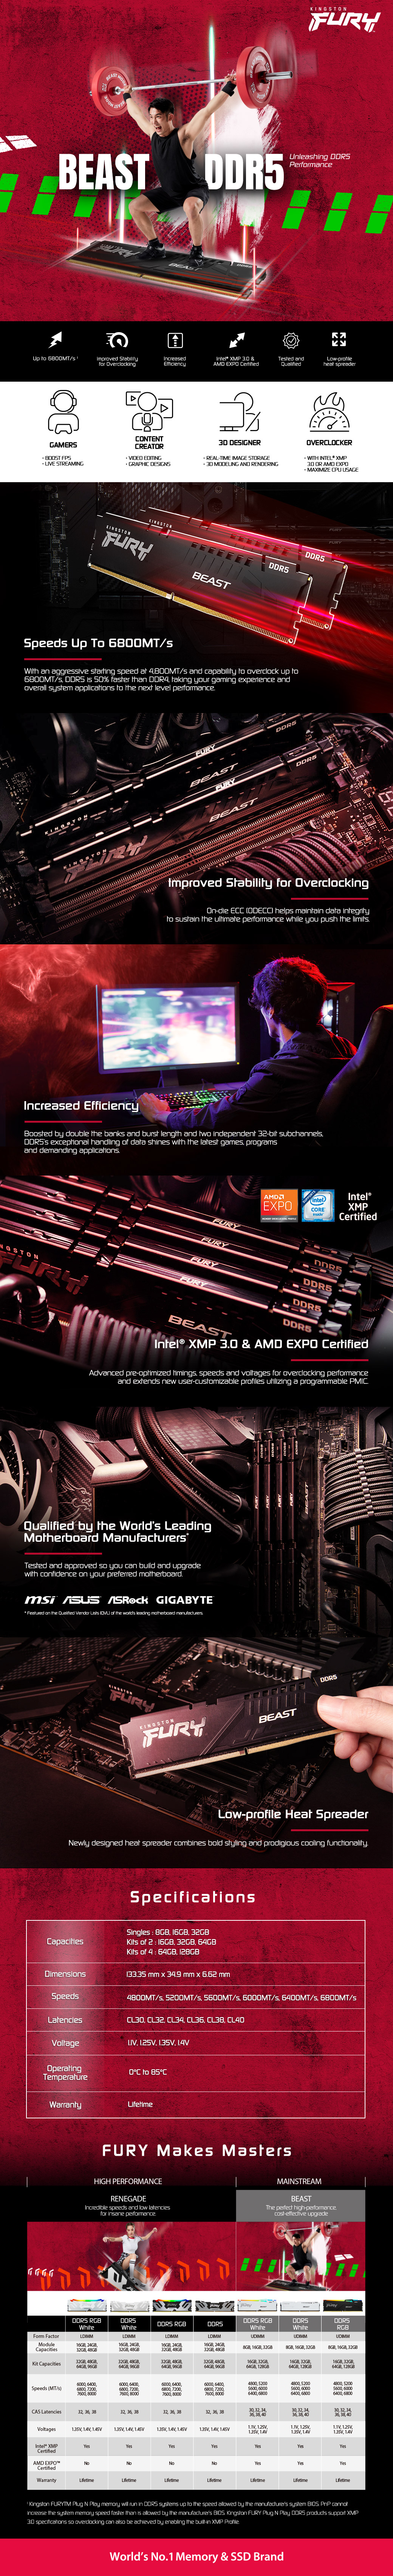 A large marketing image providing additional information about the product Kingston 64GB Kit (2x32GB) DDR5 Fury Beast EXPO/AMP CL32 6400MHz - Additional alt info not provided